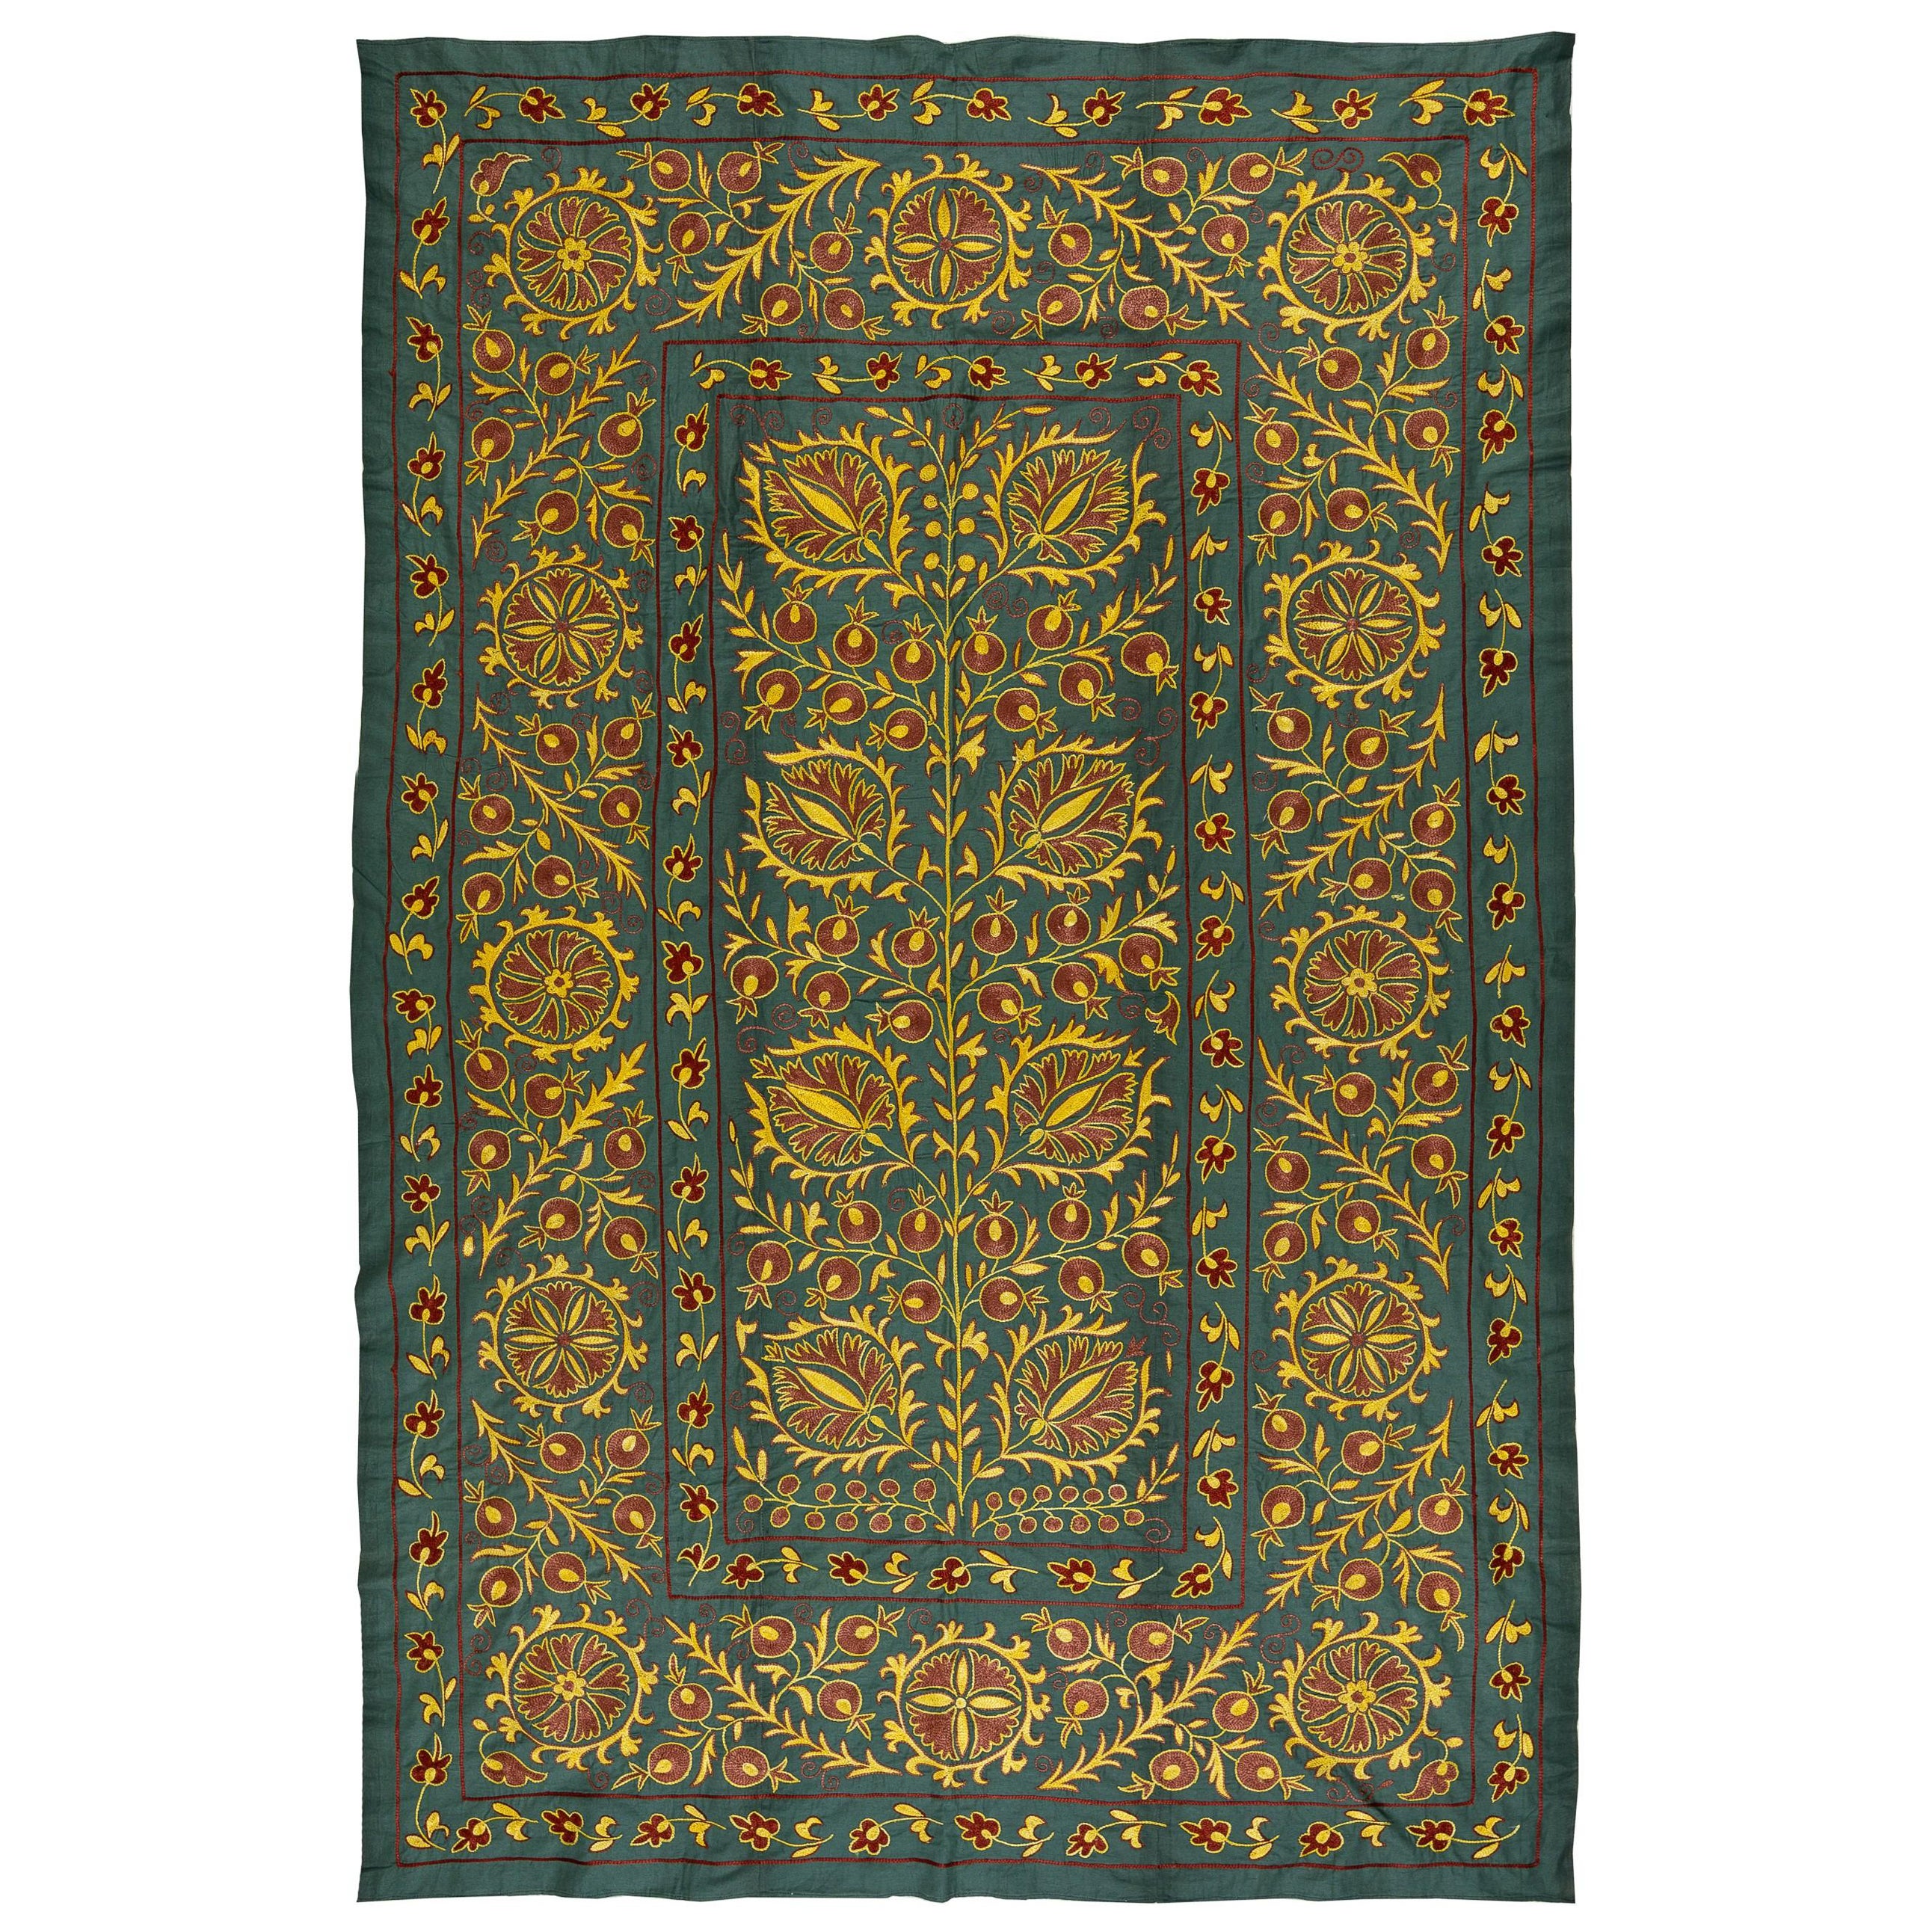 Modern Uzbek Suzani Textile, Embroidered Cotton & Silk Wall Hanging For Sale